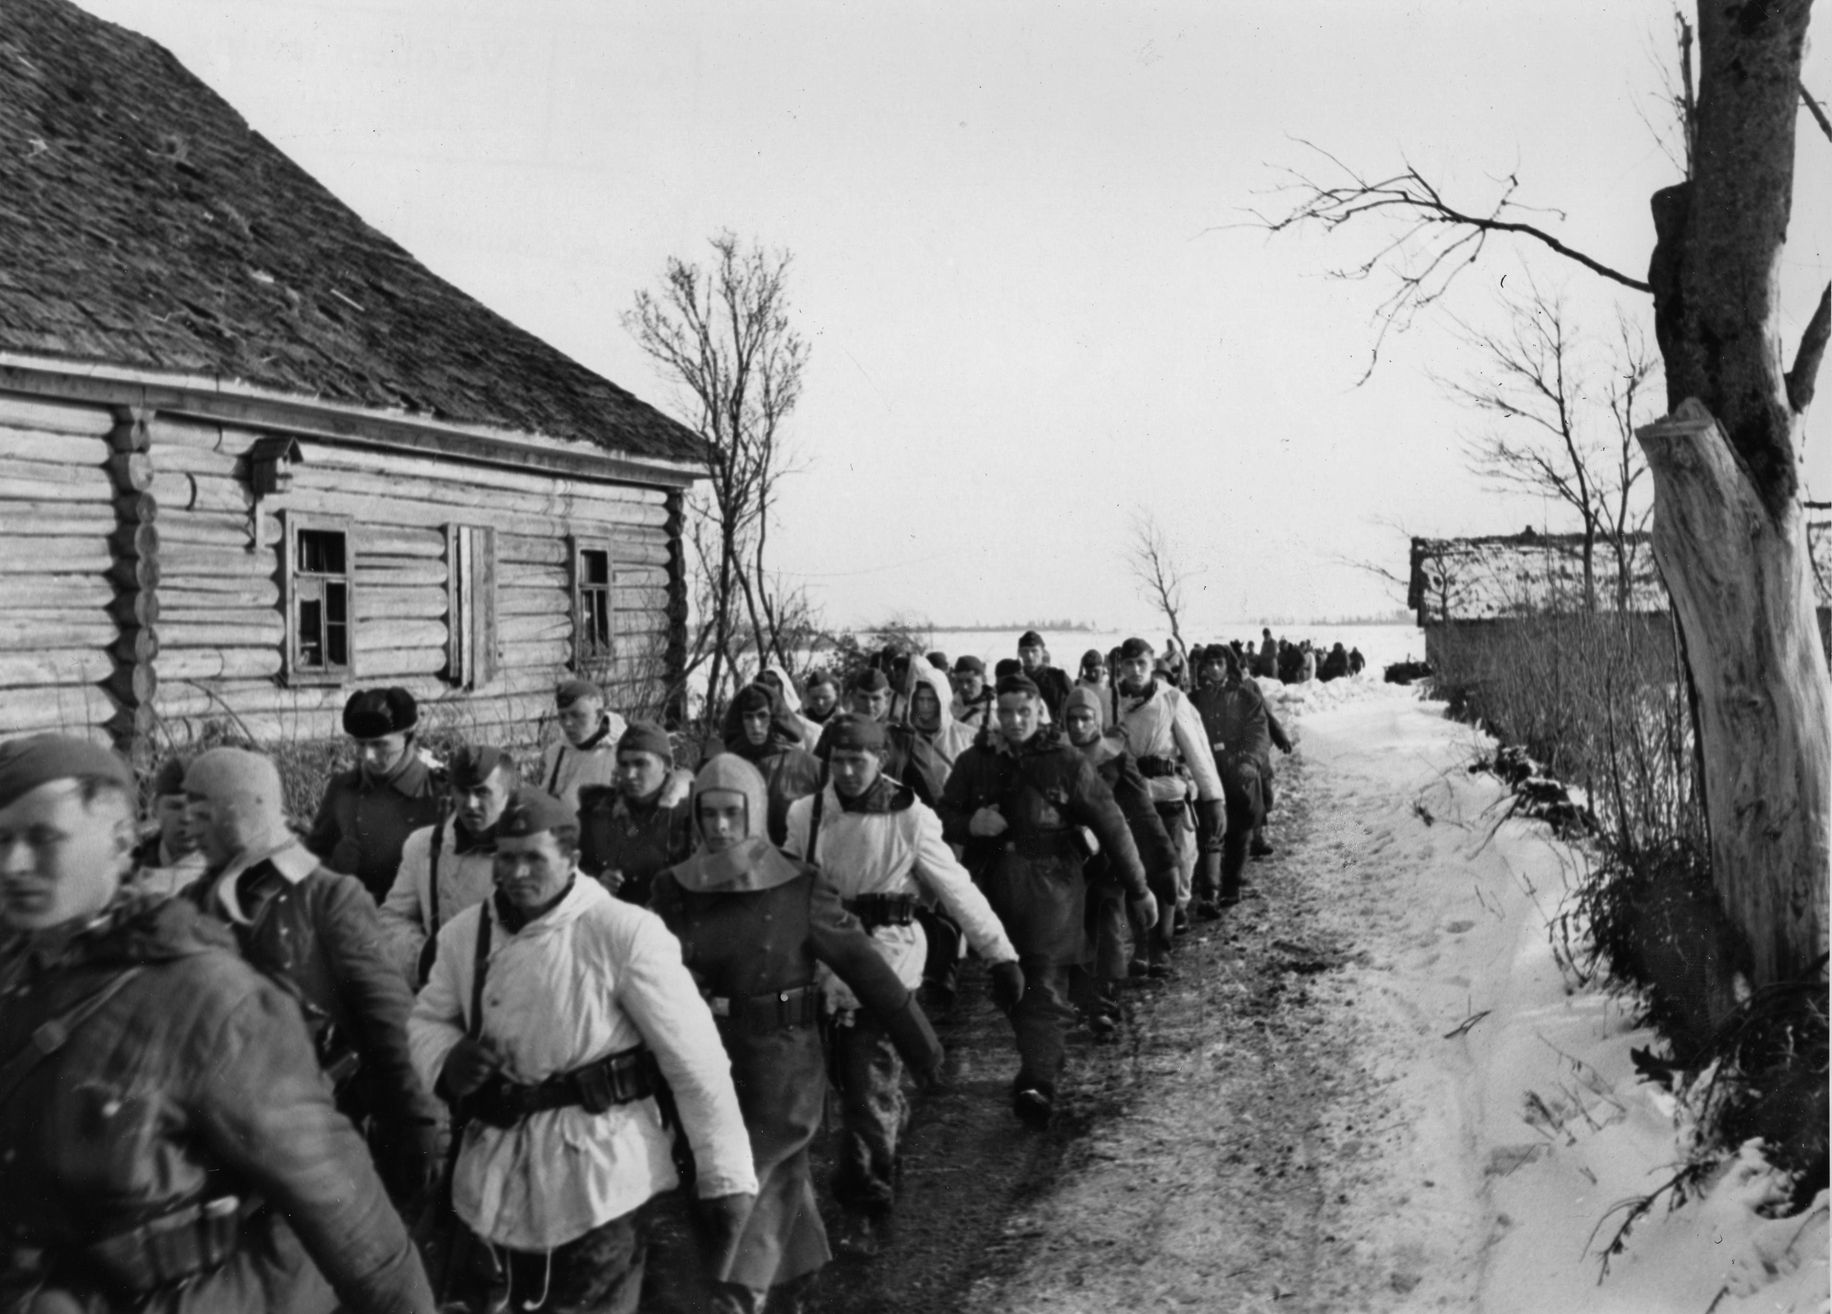 On the move in March 1944, a column of soldiers of the 14th Waffen Grenadier Division of the SS advances somewhere in the Ukraine. The division was originally populated with Ukrainian men and later augmented with other non-German troops.